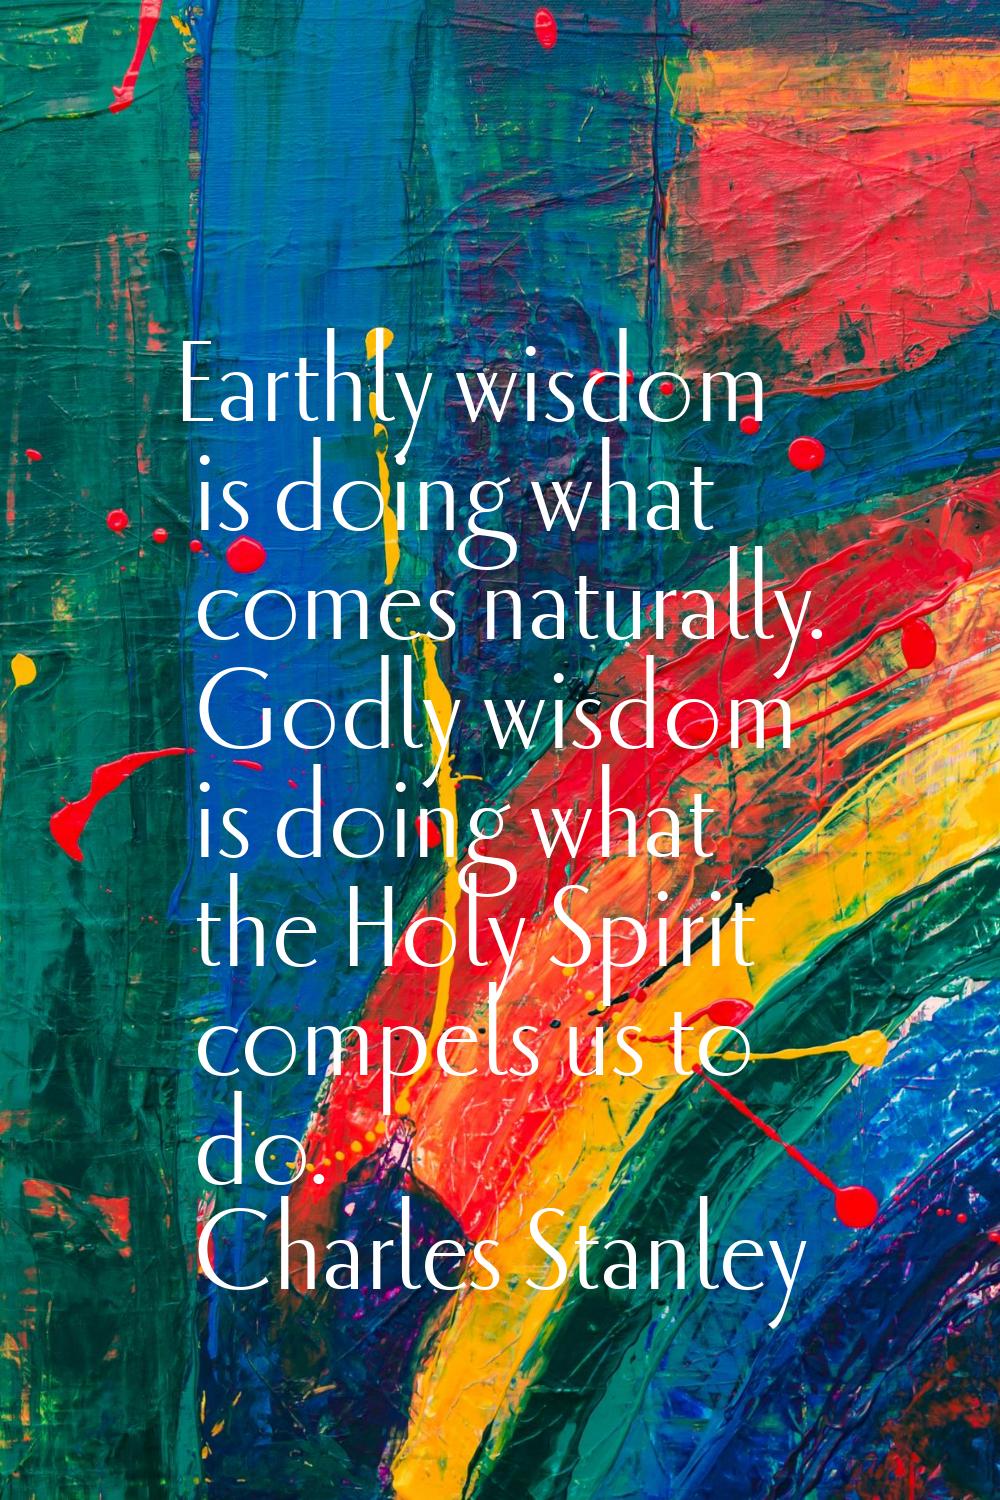 Earthly wisdom is doing what comes naturally. Godly wisdom is doing what the Holy Spirit compels us